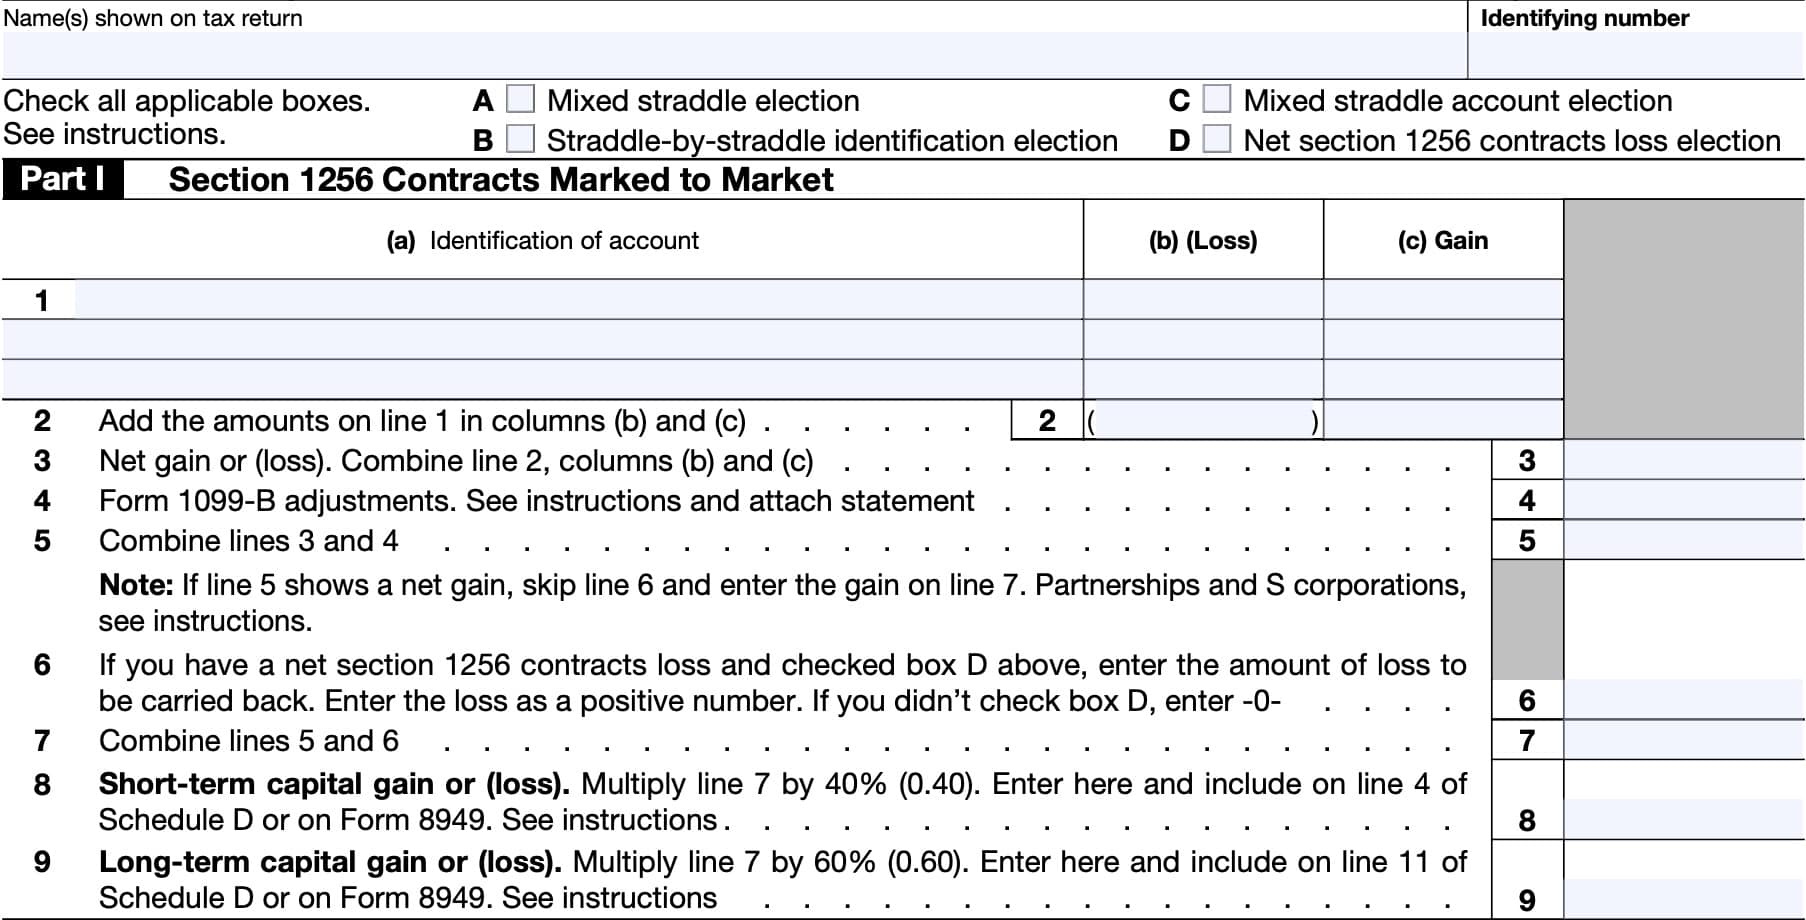 irs form 6781, part i: section 1256 contracts marked to market